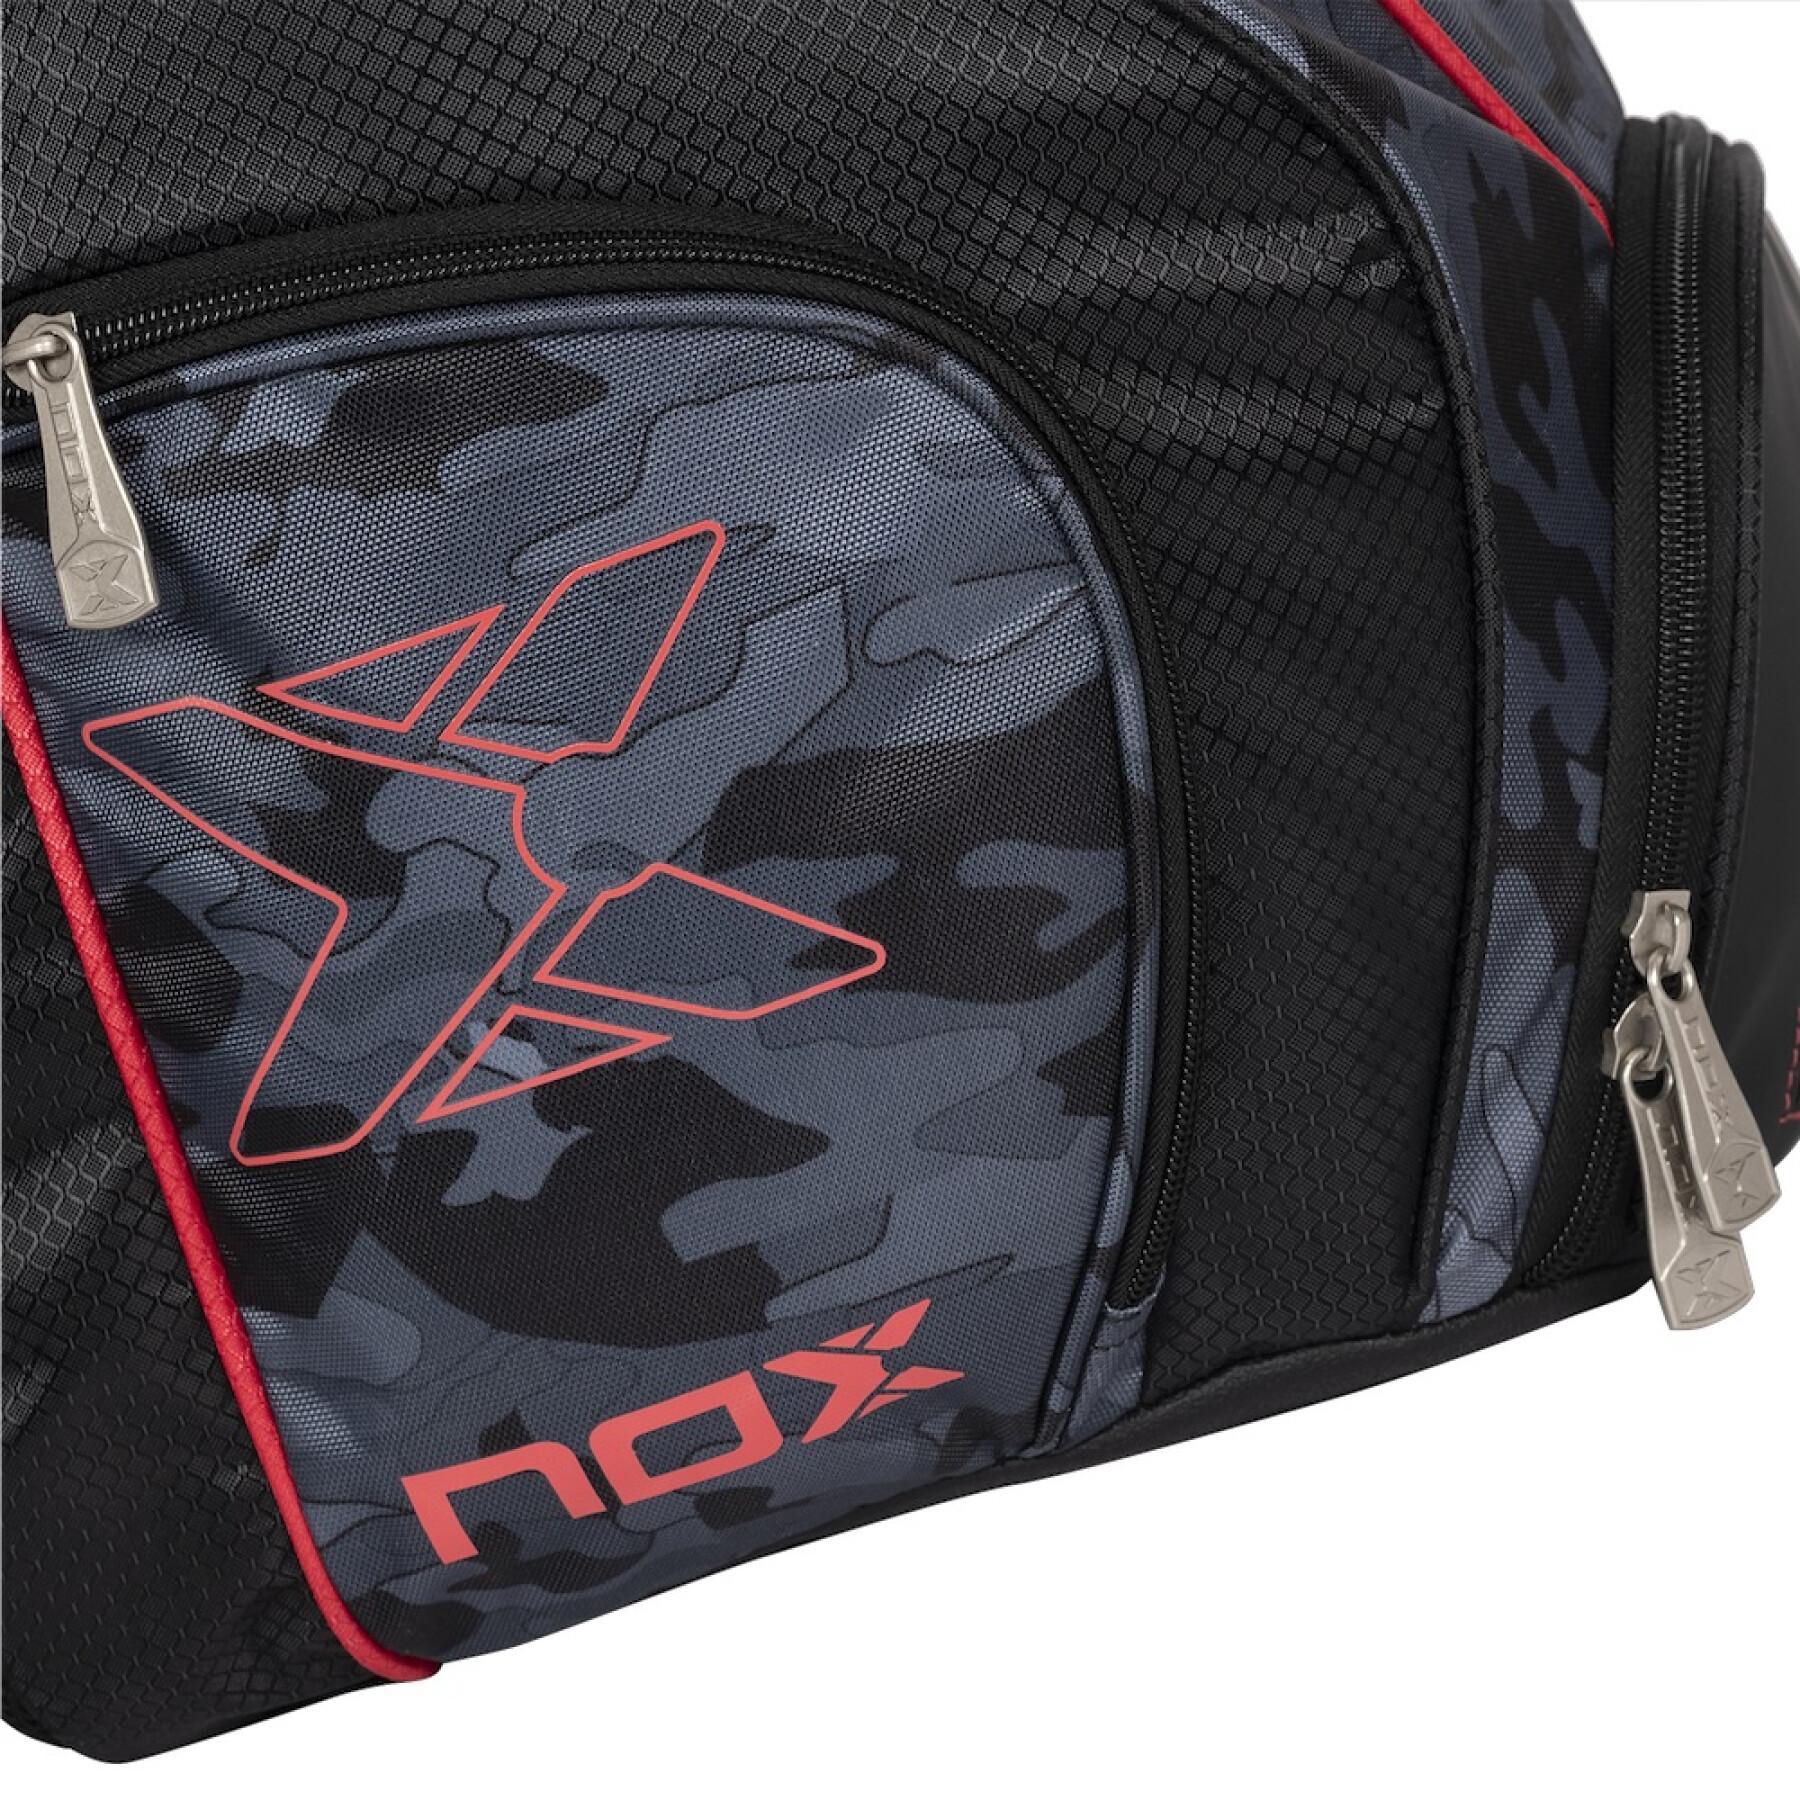 Backpack Nox Camouflage